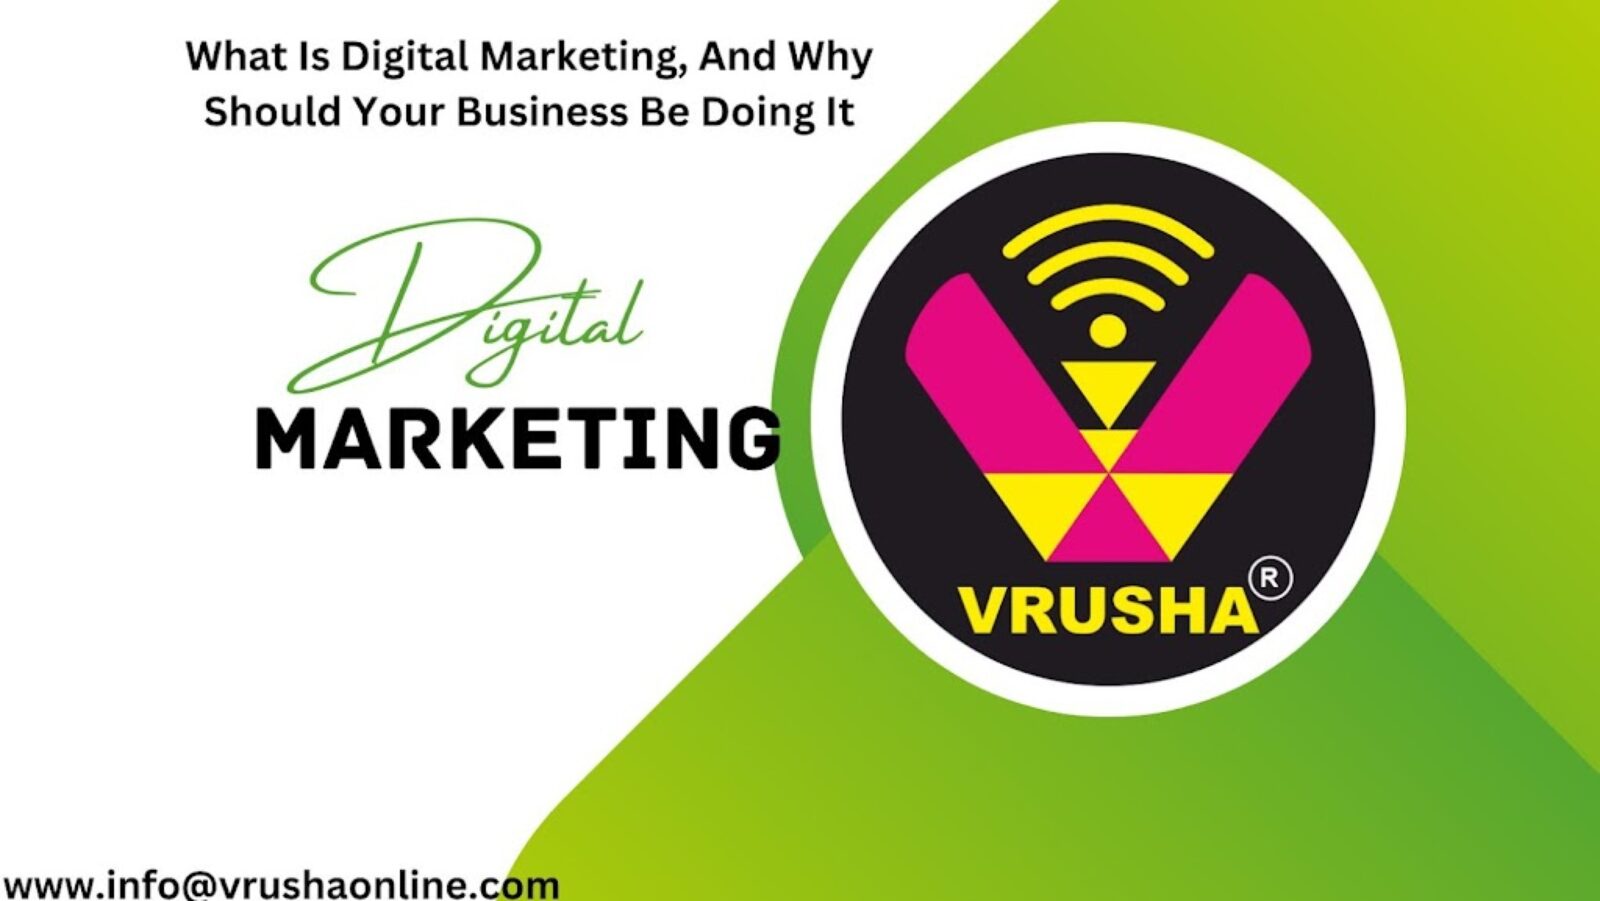 What Is Digital Marketing, And Why Should Your Business Be Doing It